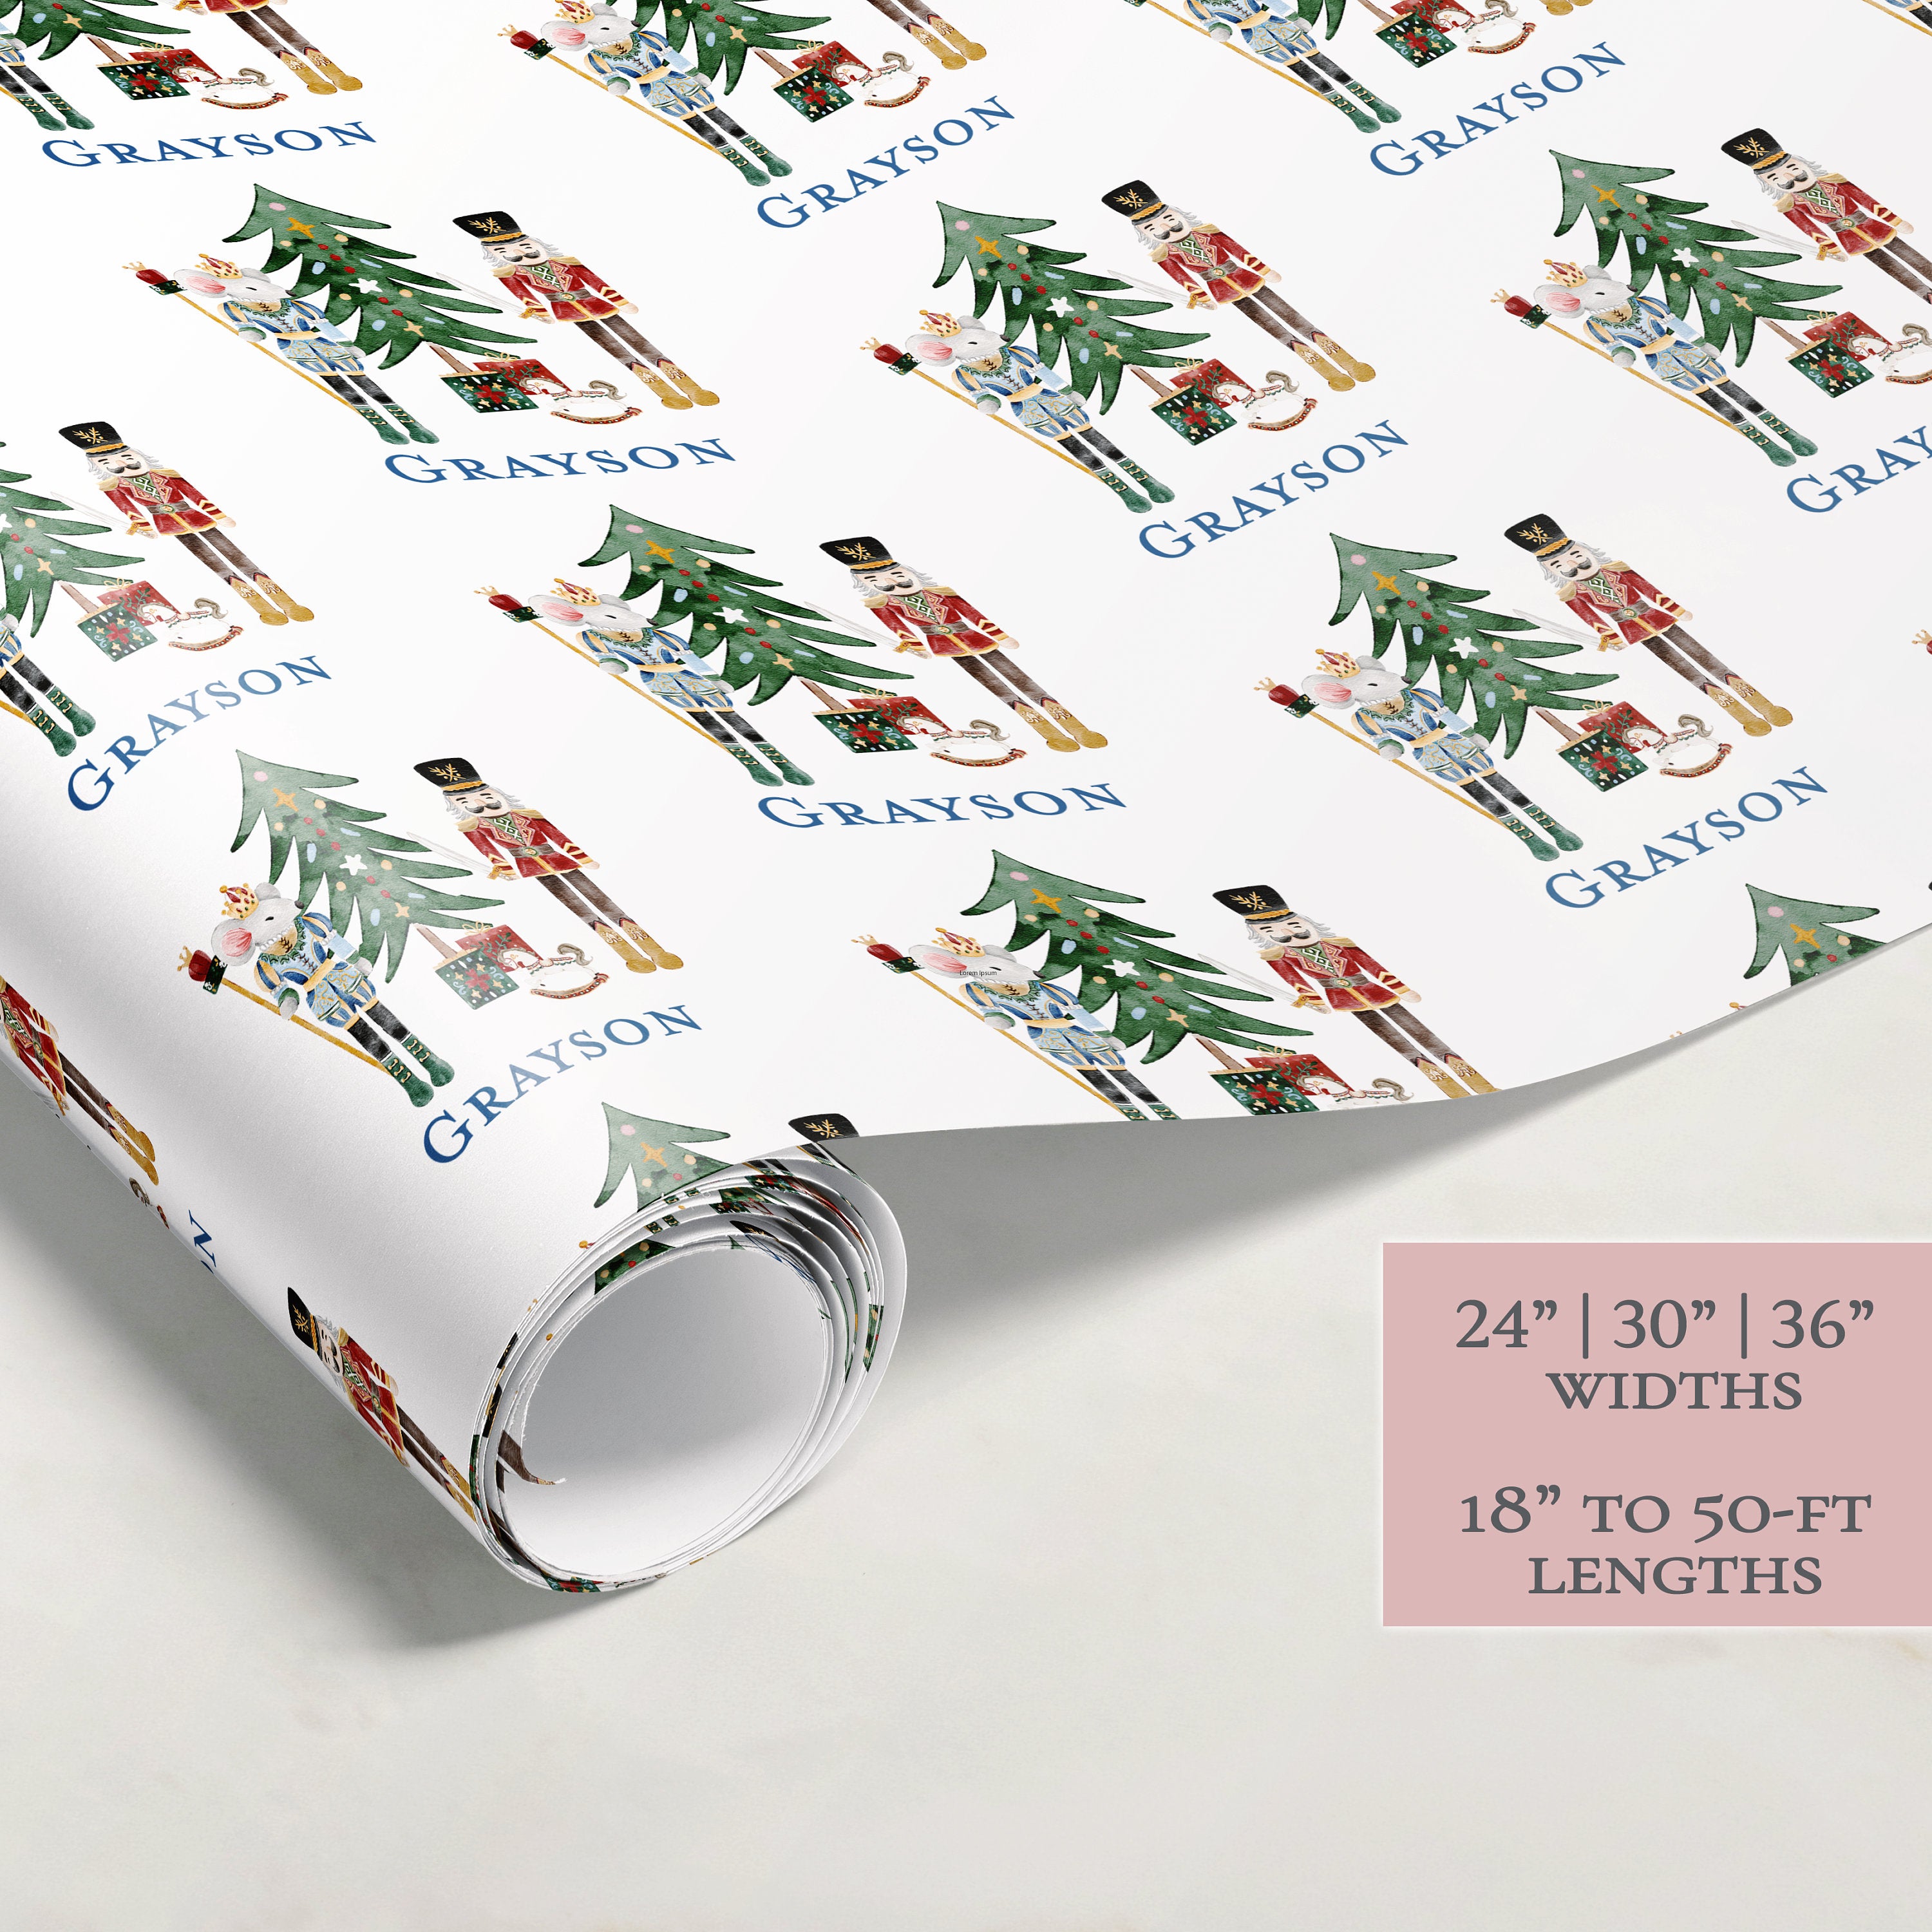 Christmas Nutcracker Wrapping Paper | Personalized | Wrapping Paper Rolls | Custom Gift Wrap | Name | Holiday Gift | Christmas Tree | Family